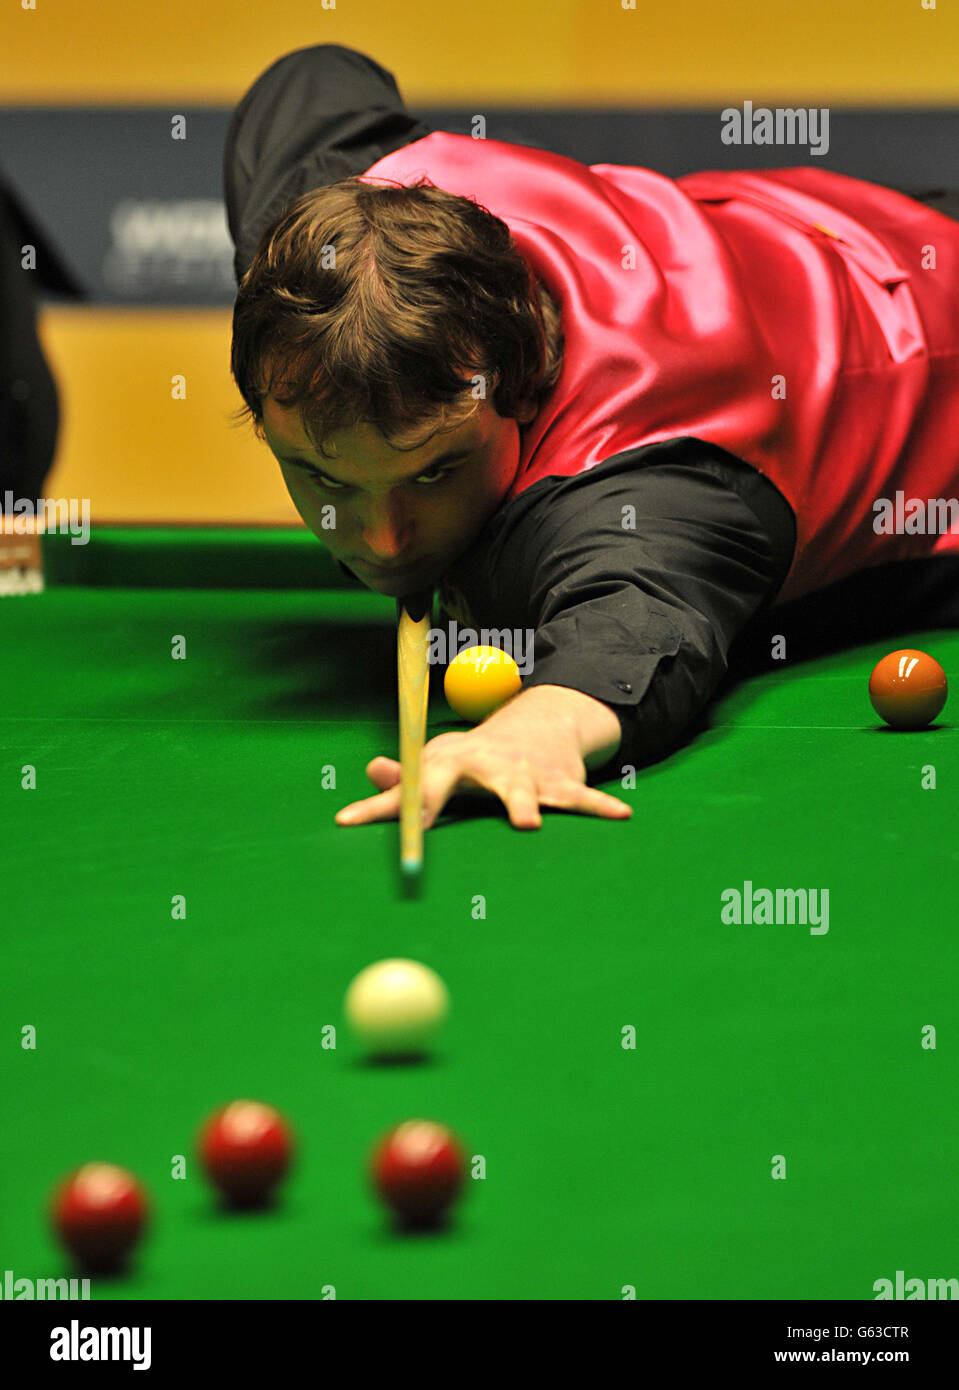 Sam Baird in action during his first round match against Stuart Bingham during the Betfair World Championships at the Crucible, Sheffield. Stock Photo